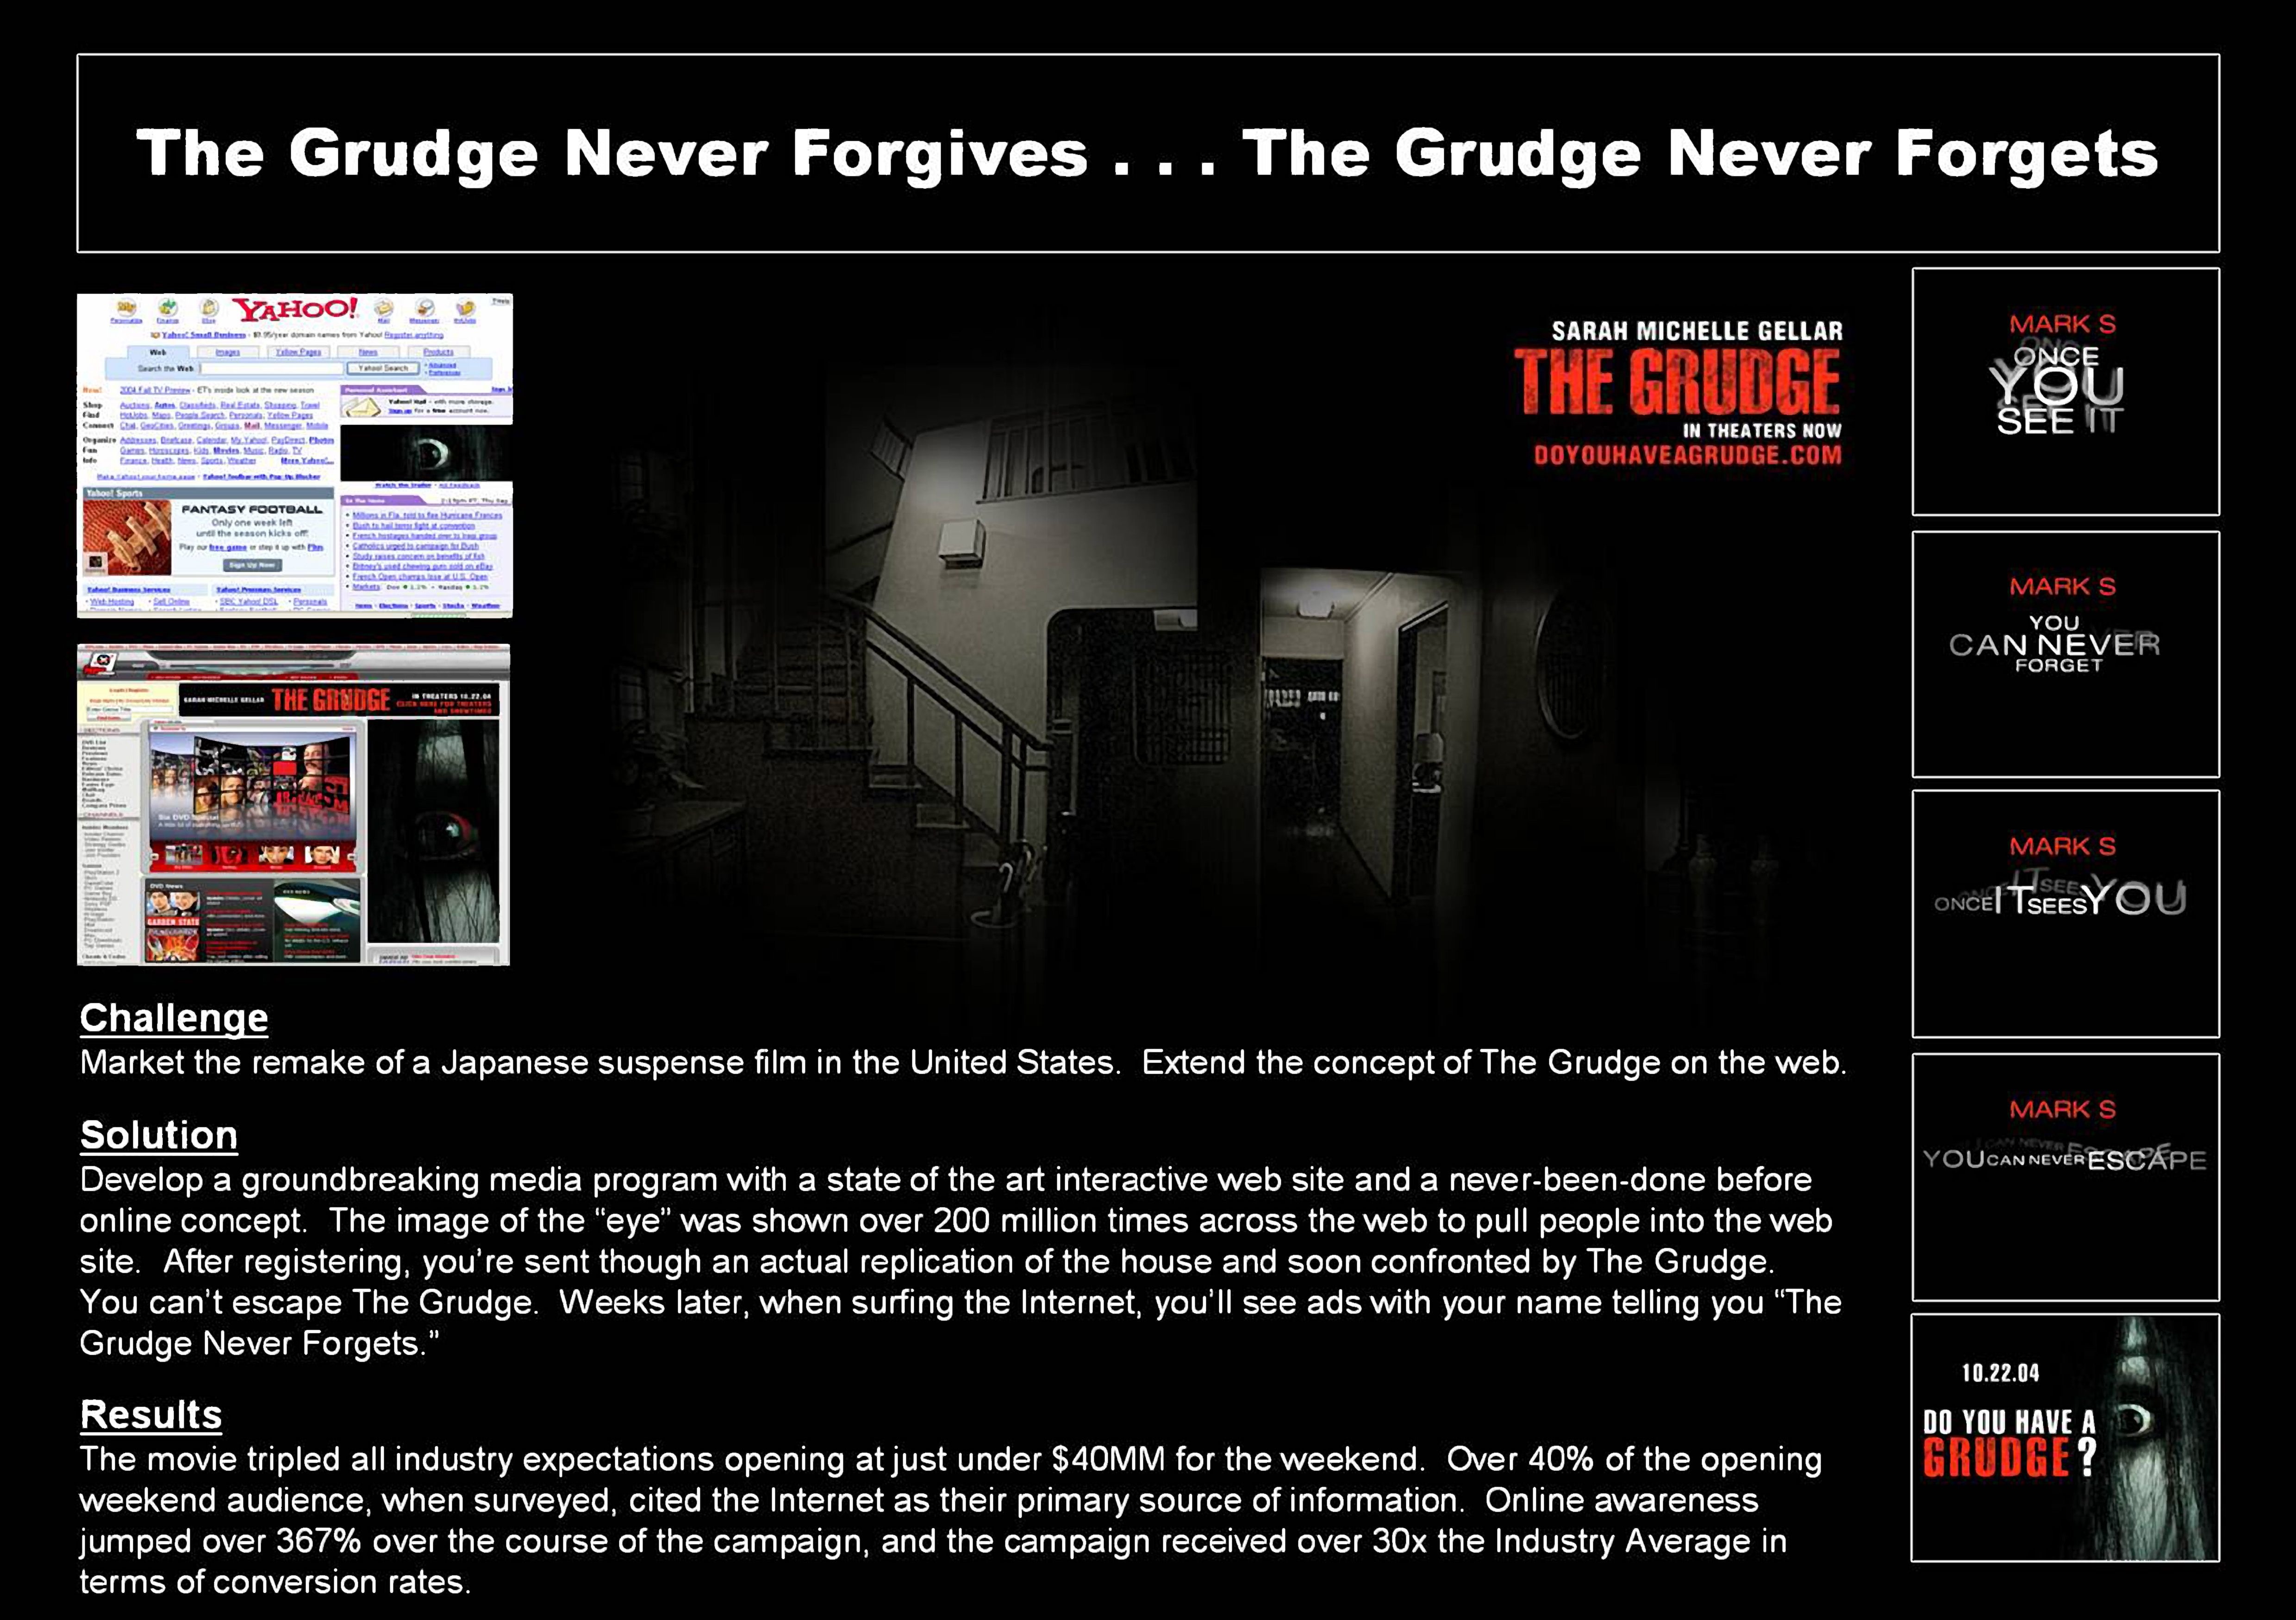 THE GRUDGE MOVIE